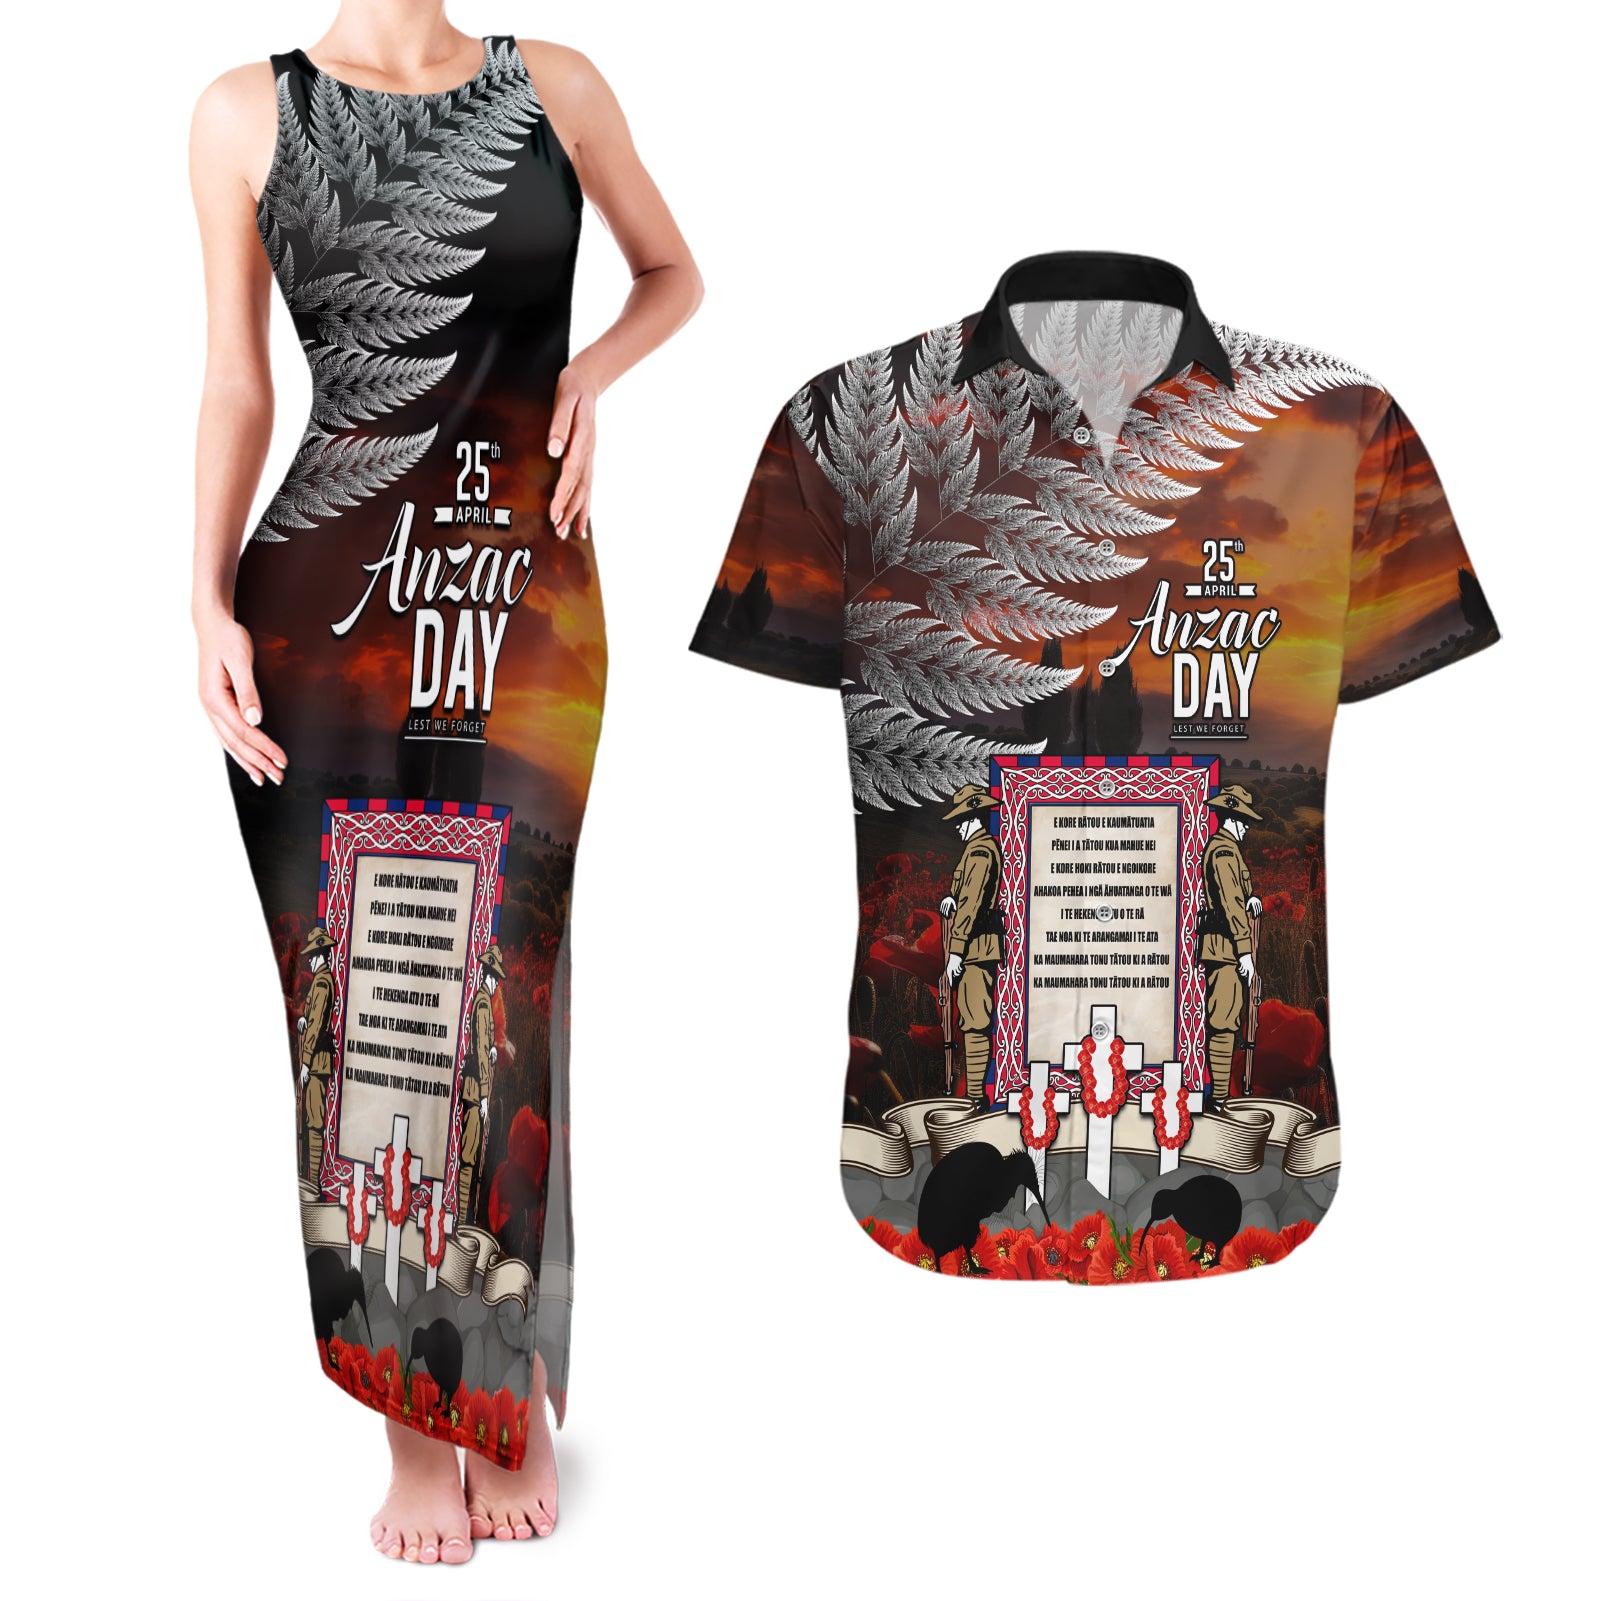 New Zealand ANZAC Day Couples Matching Tank Maxi Dress and Hawaiian Shirt The Ode of Remembrance and Silver Fern